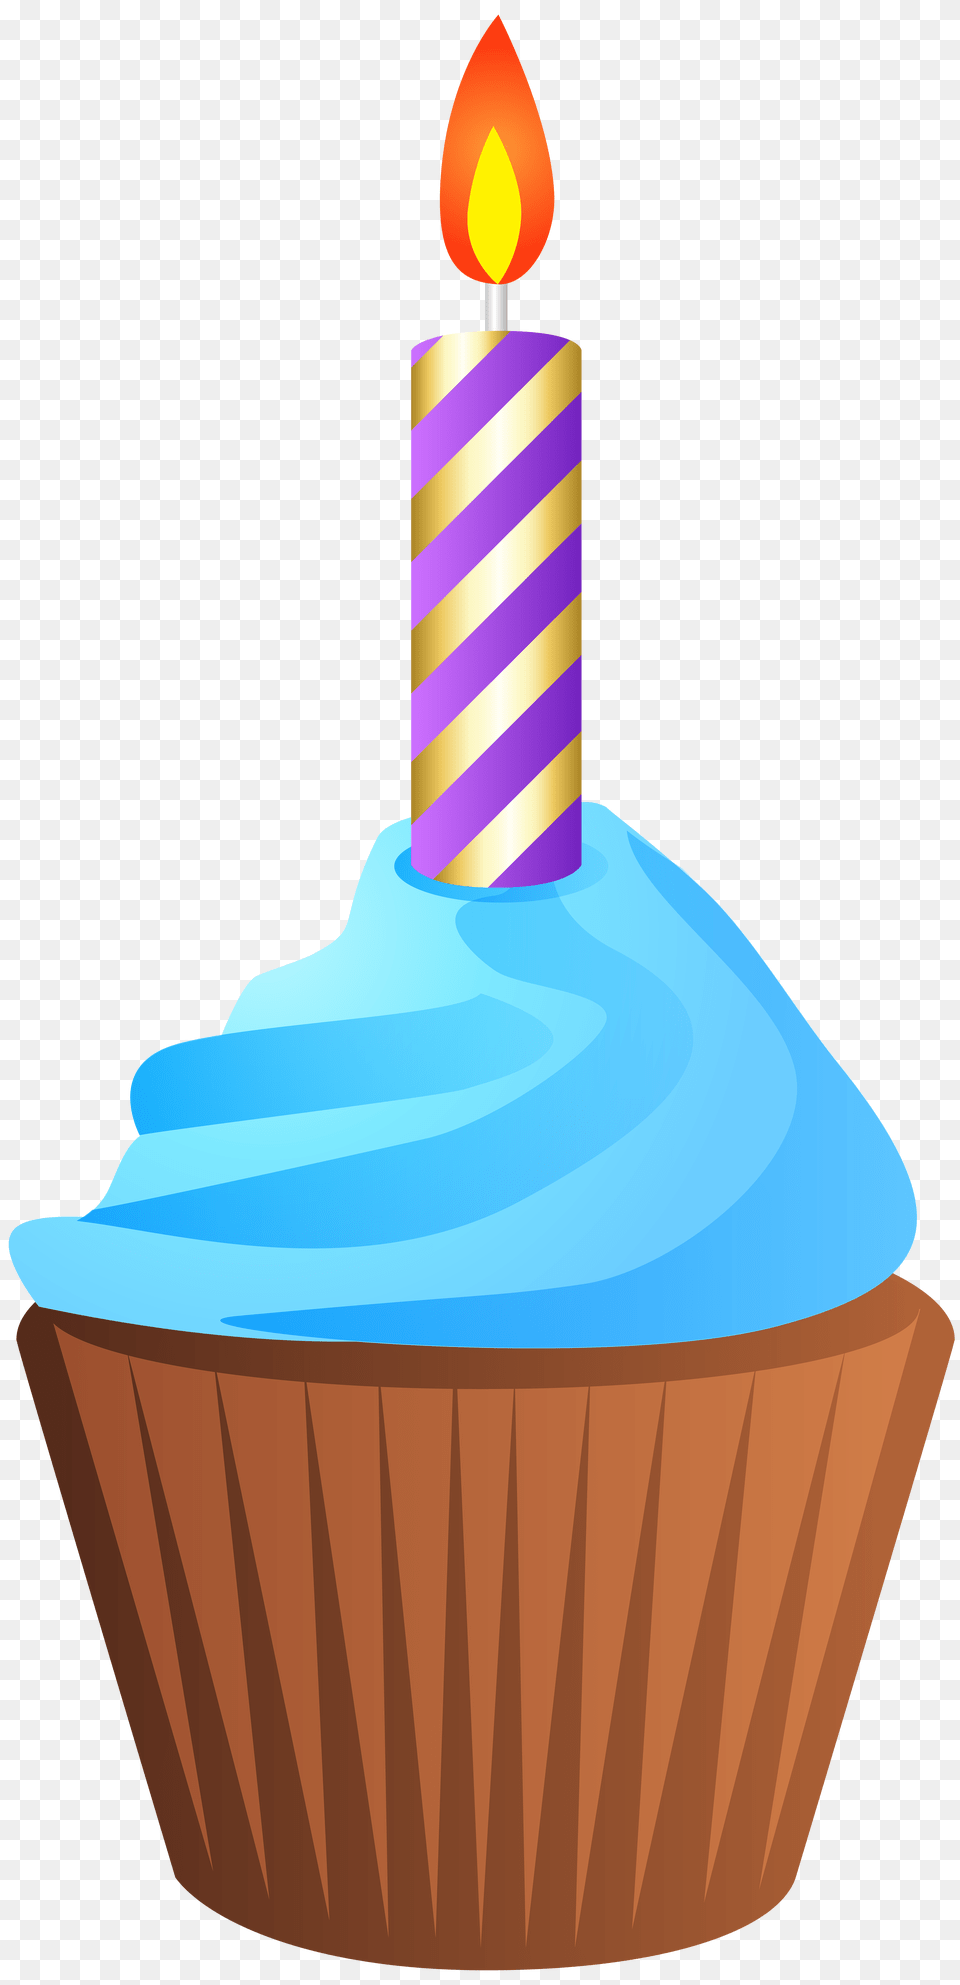 Birthday Muffin With Candle Transparent Clip Art Image, Cake, Dessert, Food, Cream Free Png